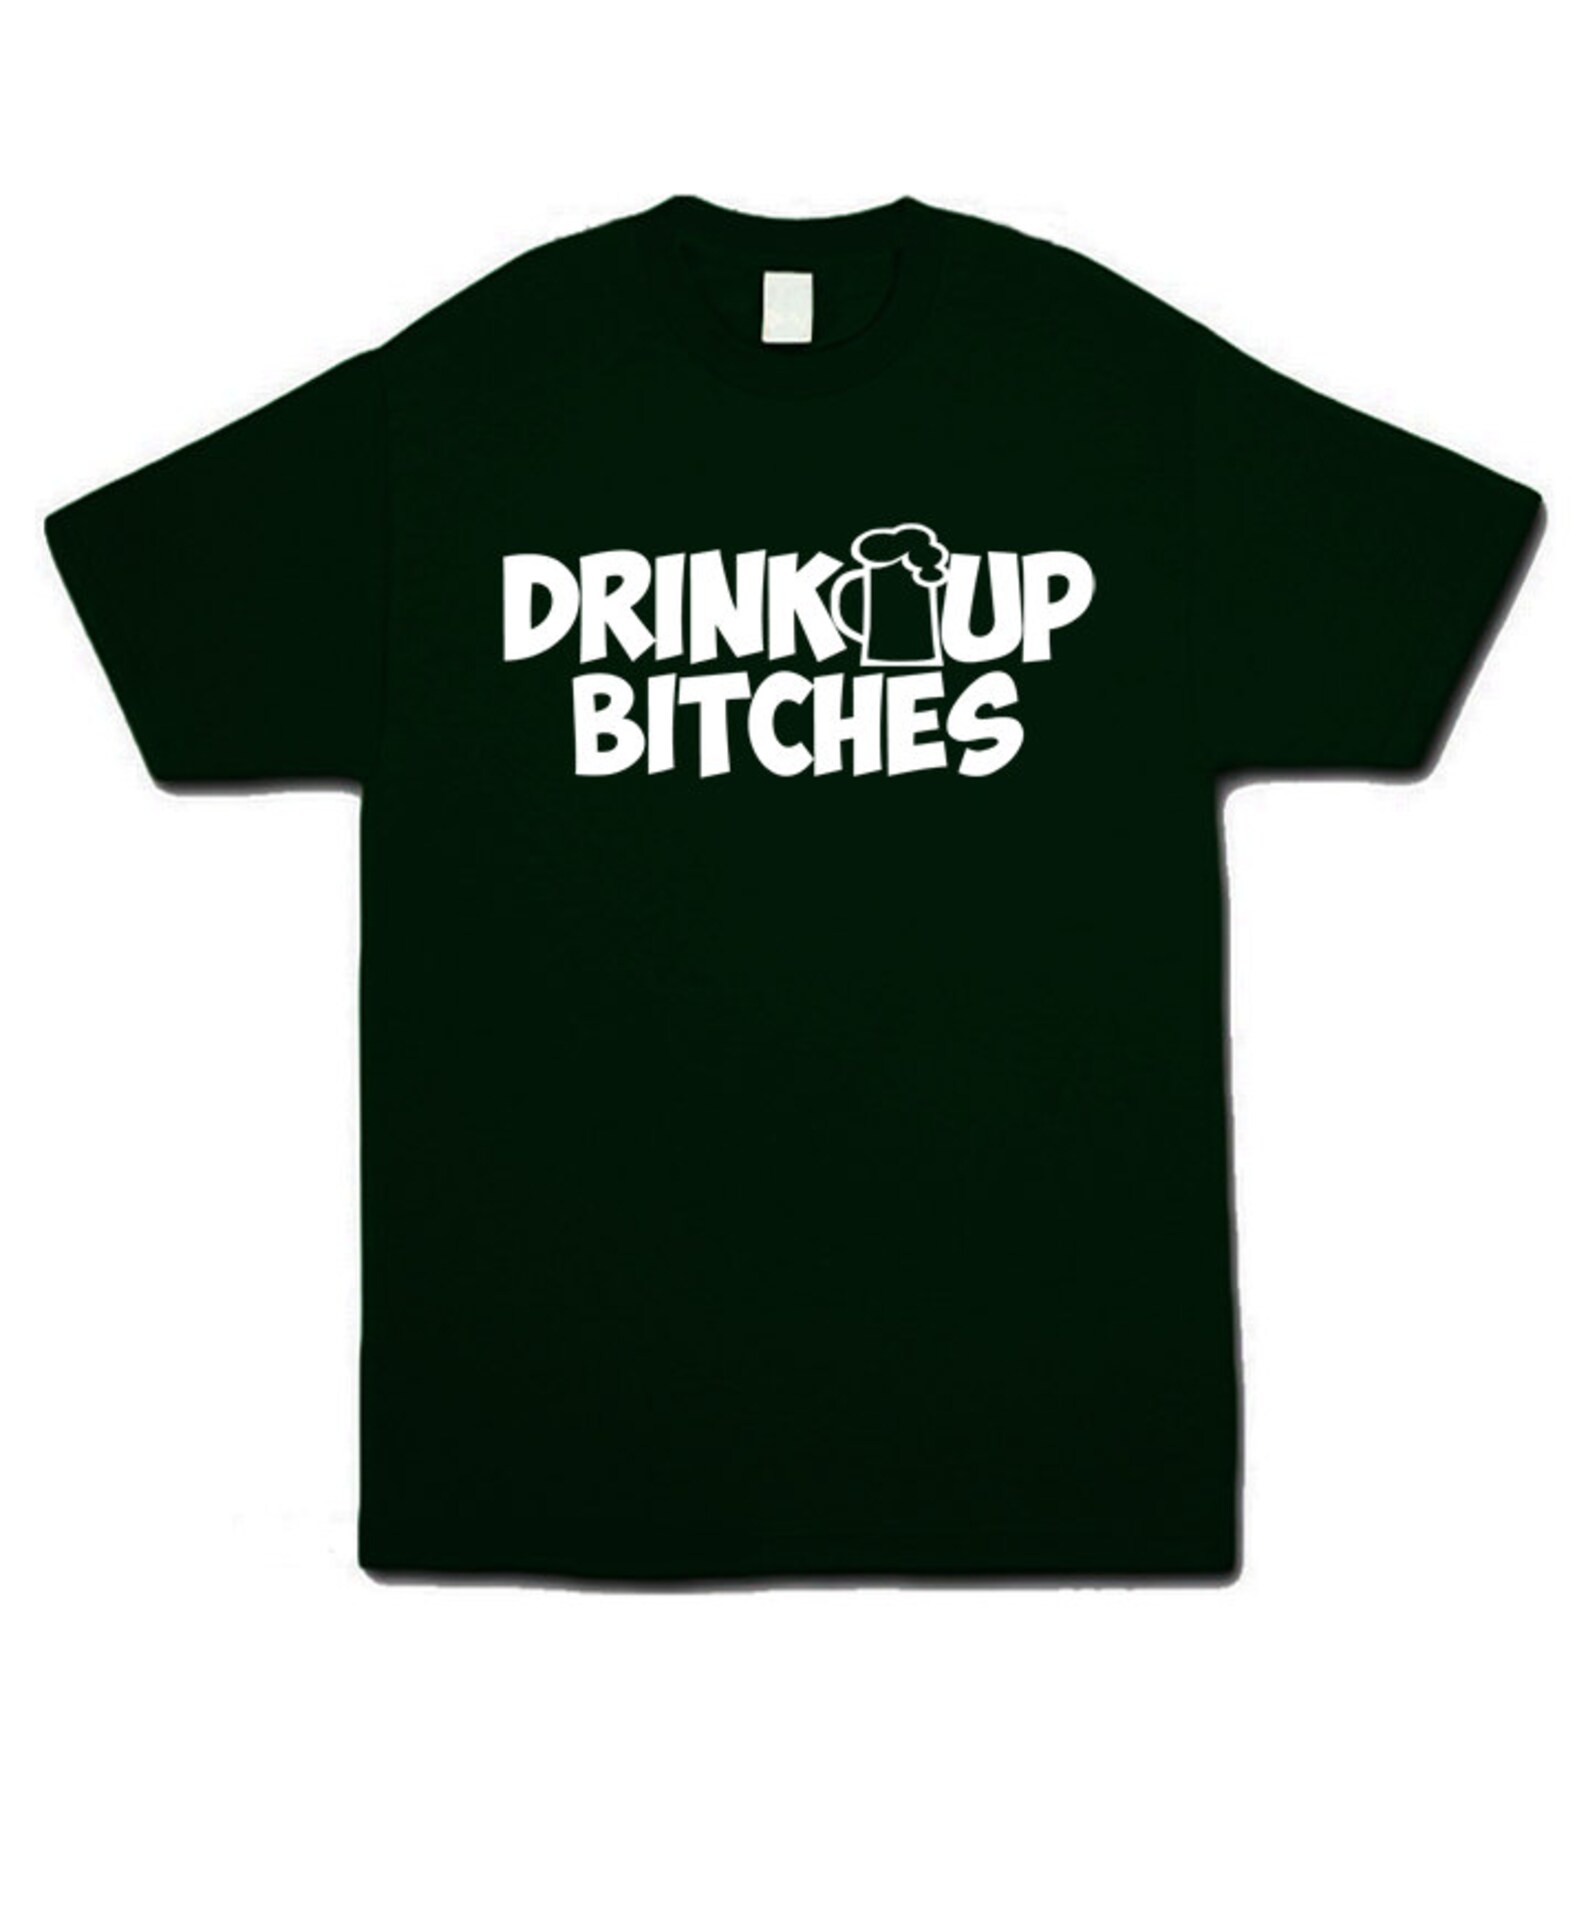 St patrick's day wine bottoms up bitches shirt